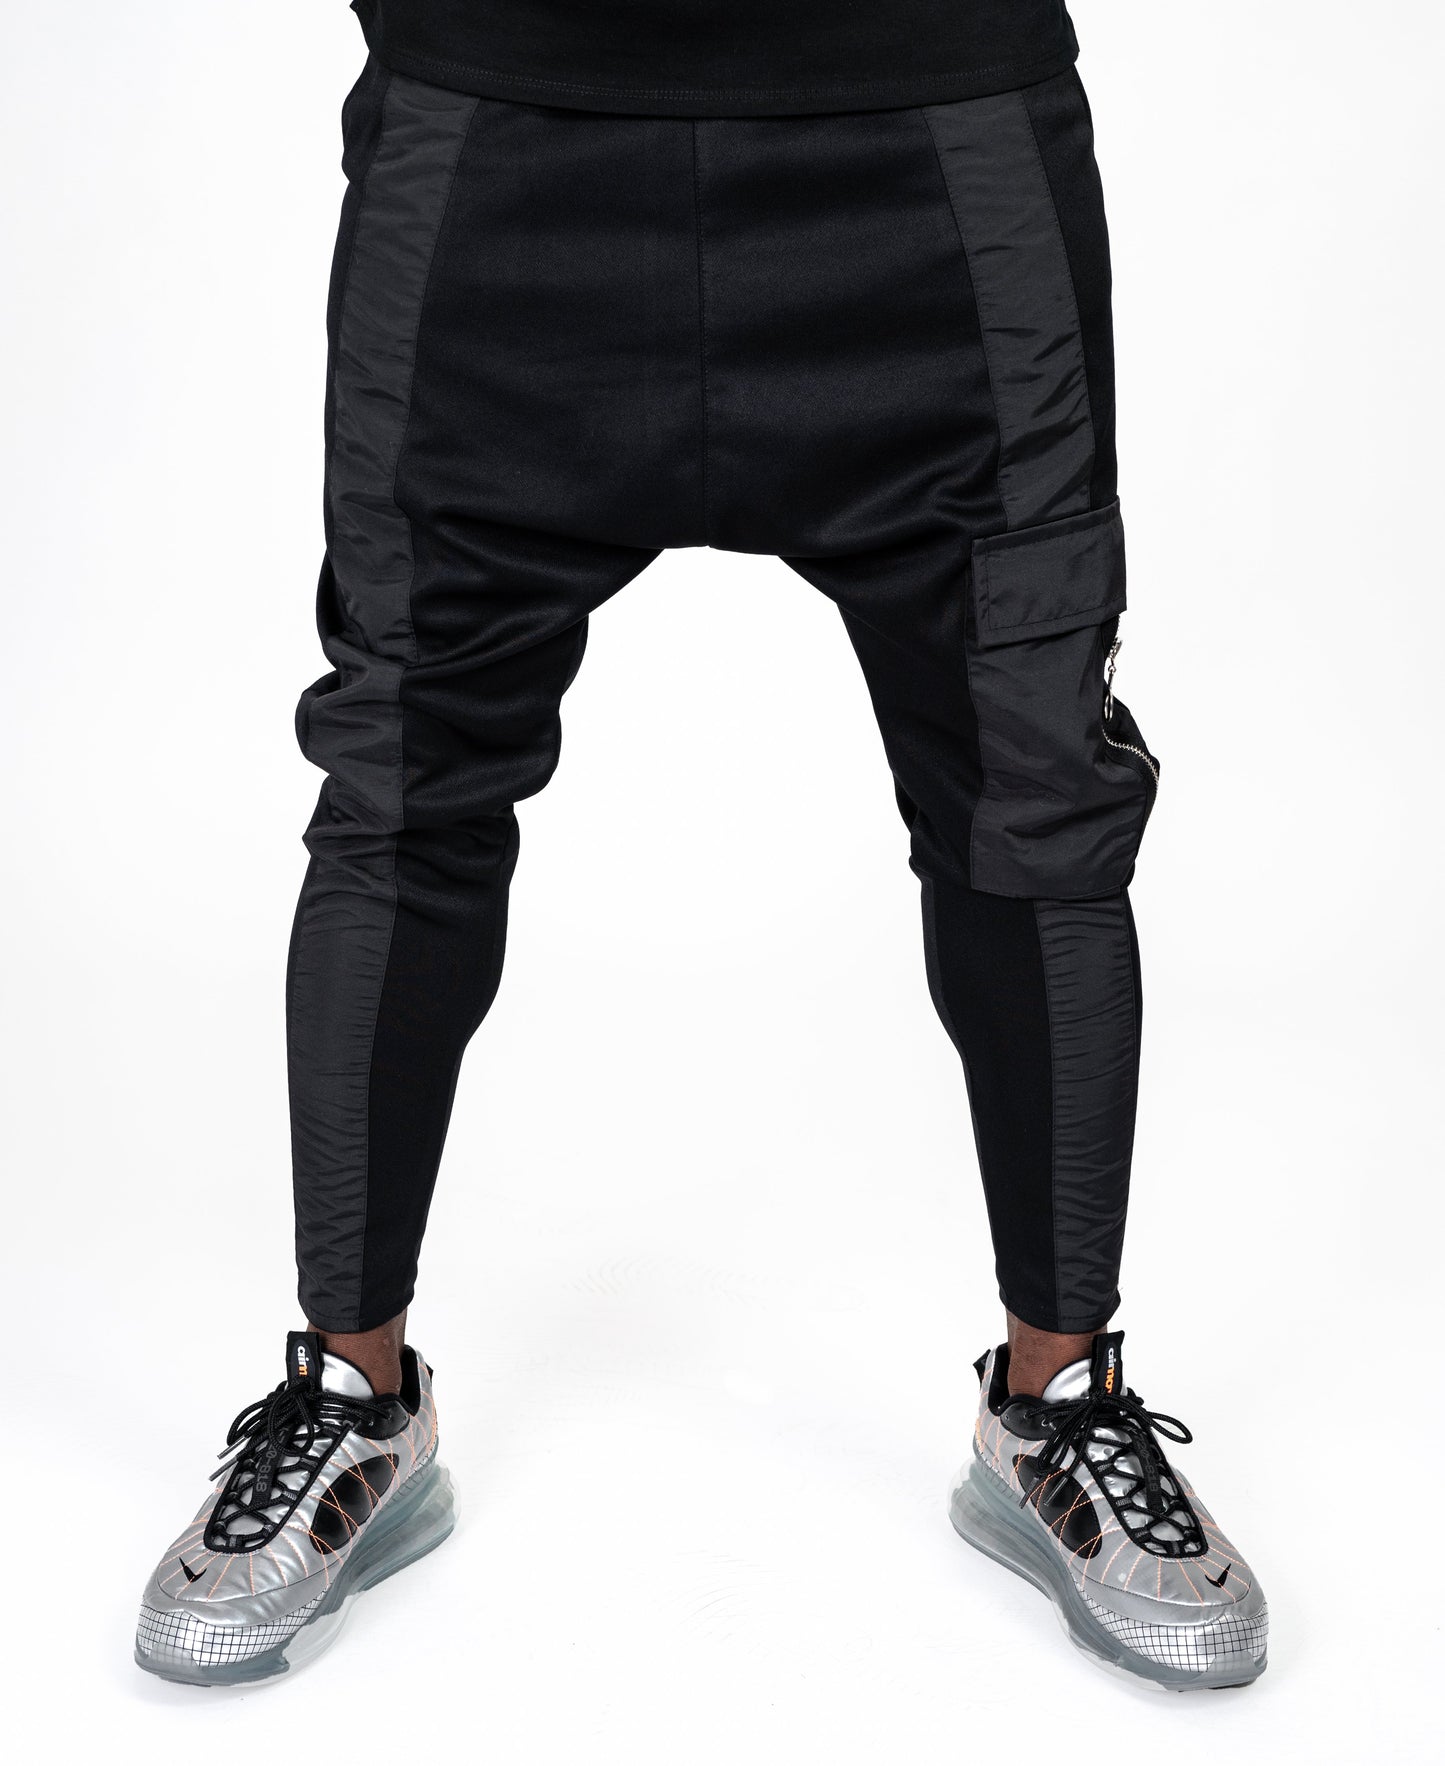 Black trousers with straight black line and one pocket - Fatai Style